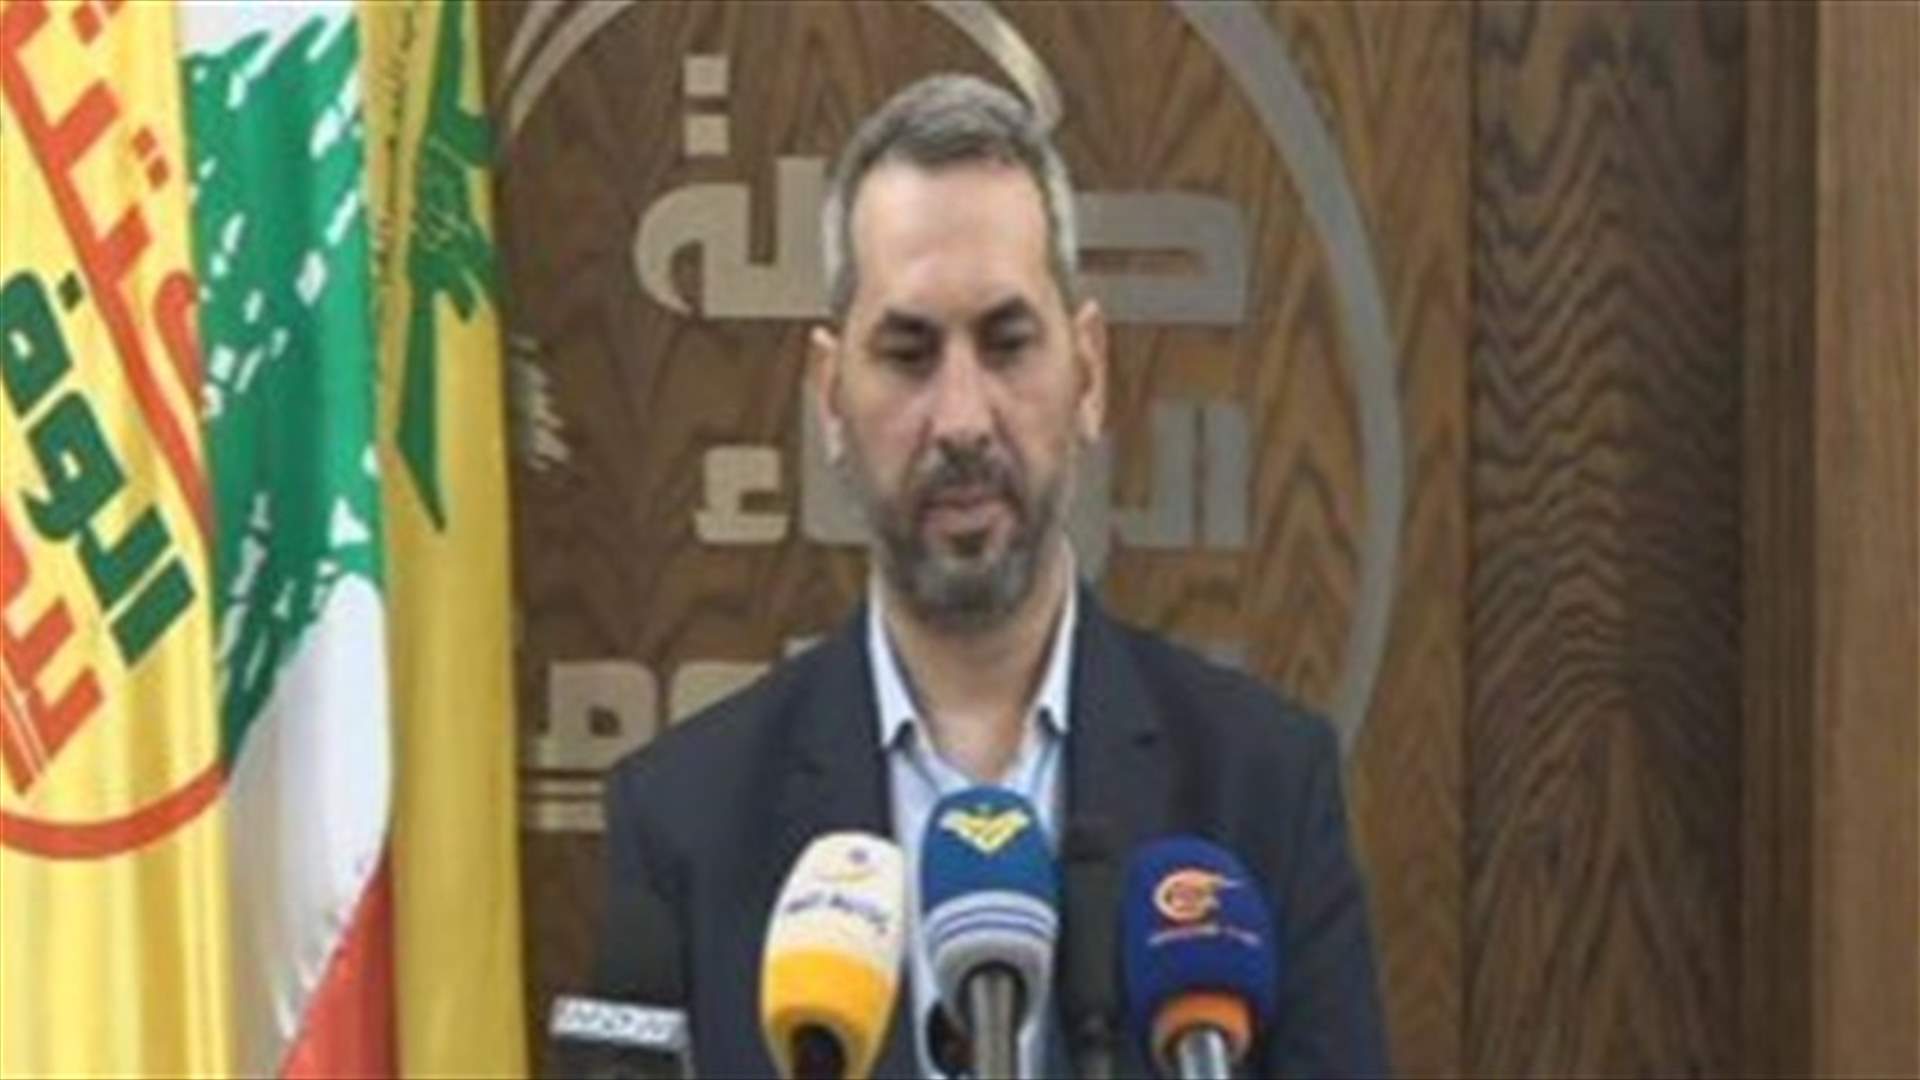 Hezbollah hits back at US criticism of its role in Lebanon